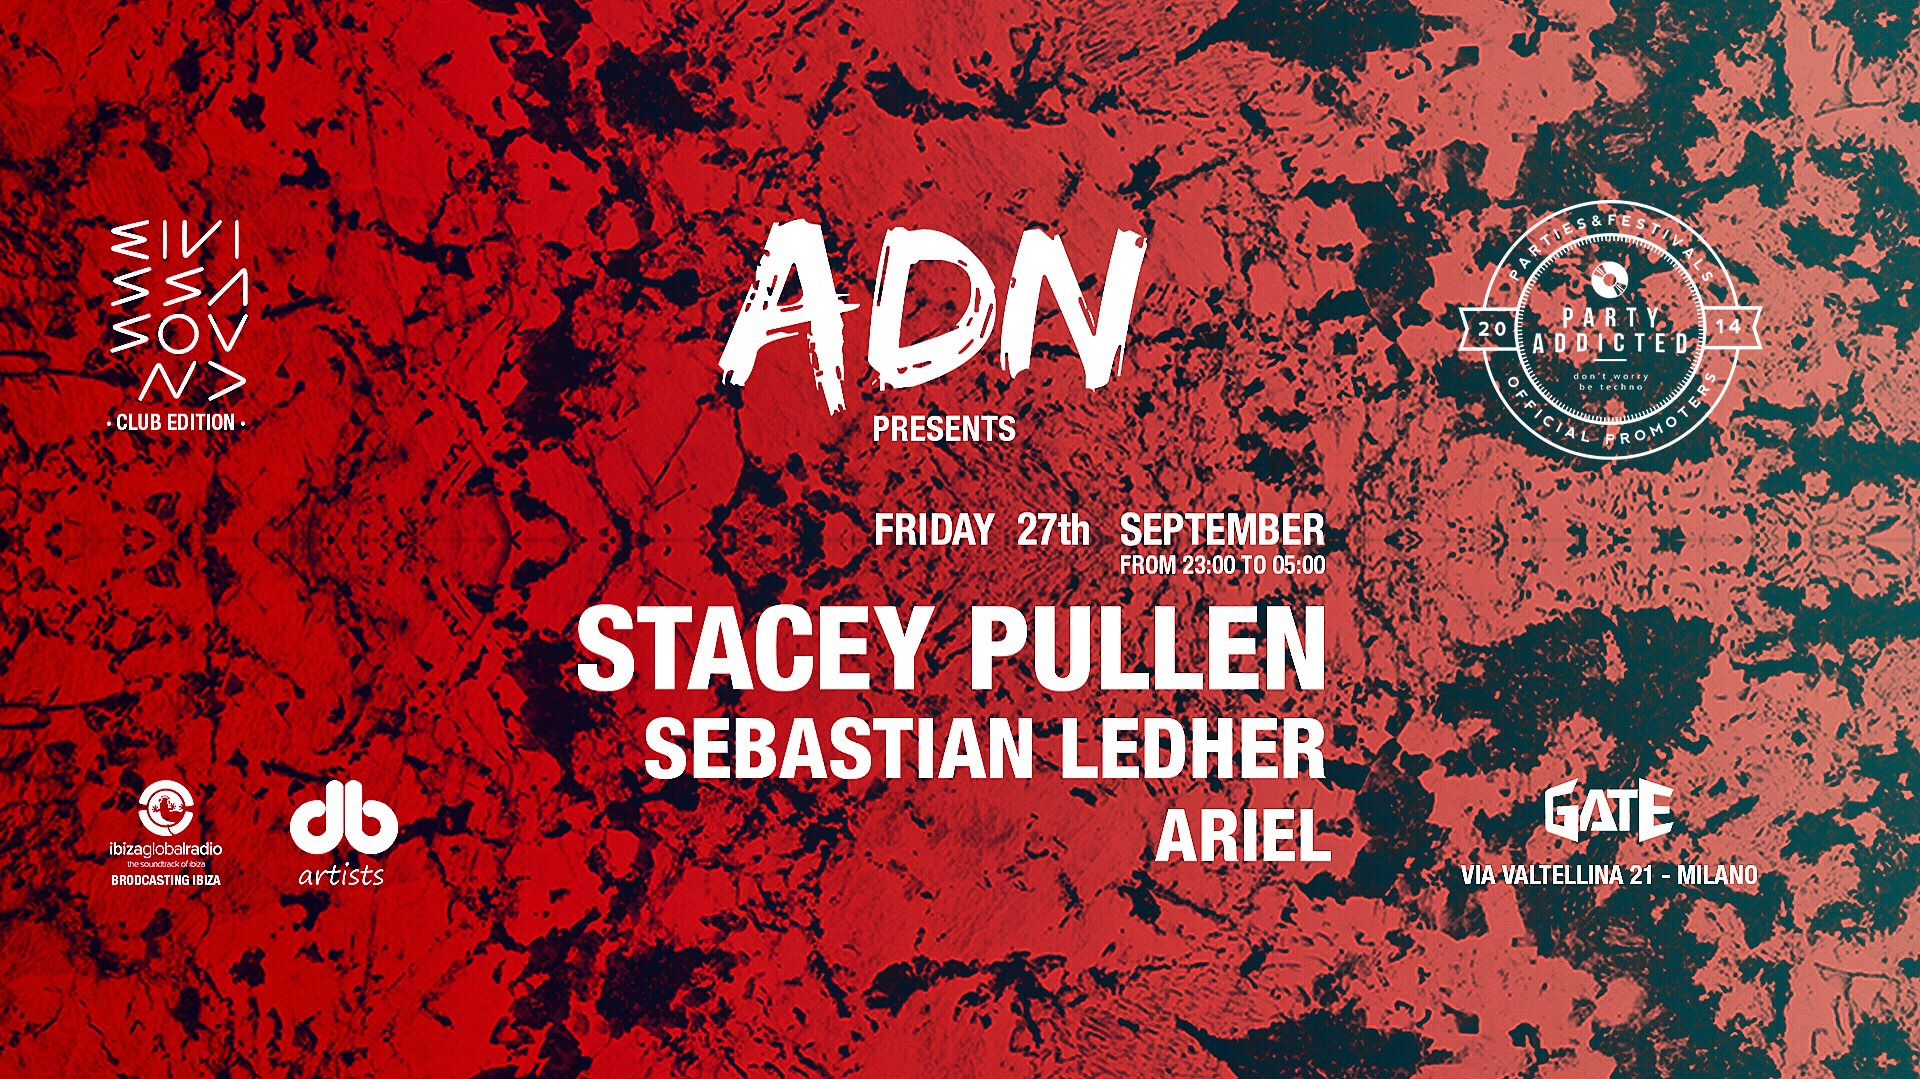 ADN Opening Party with Stacey Pullen @ Gate Milan